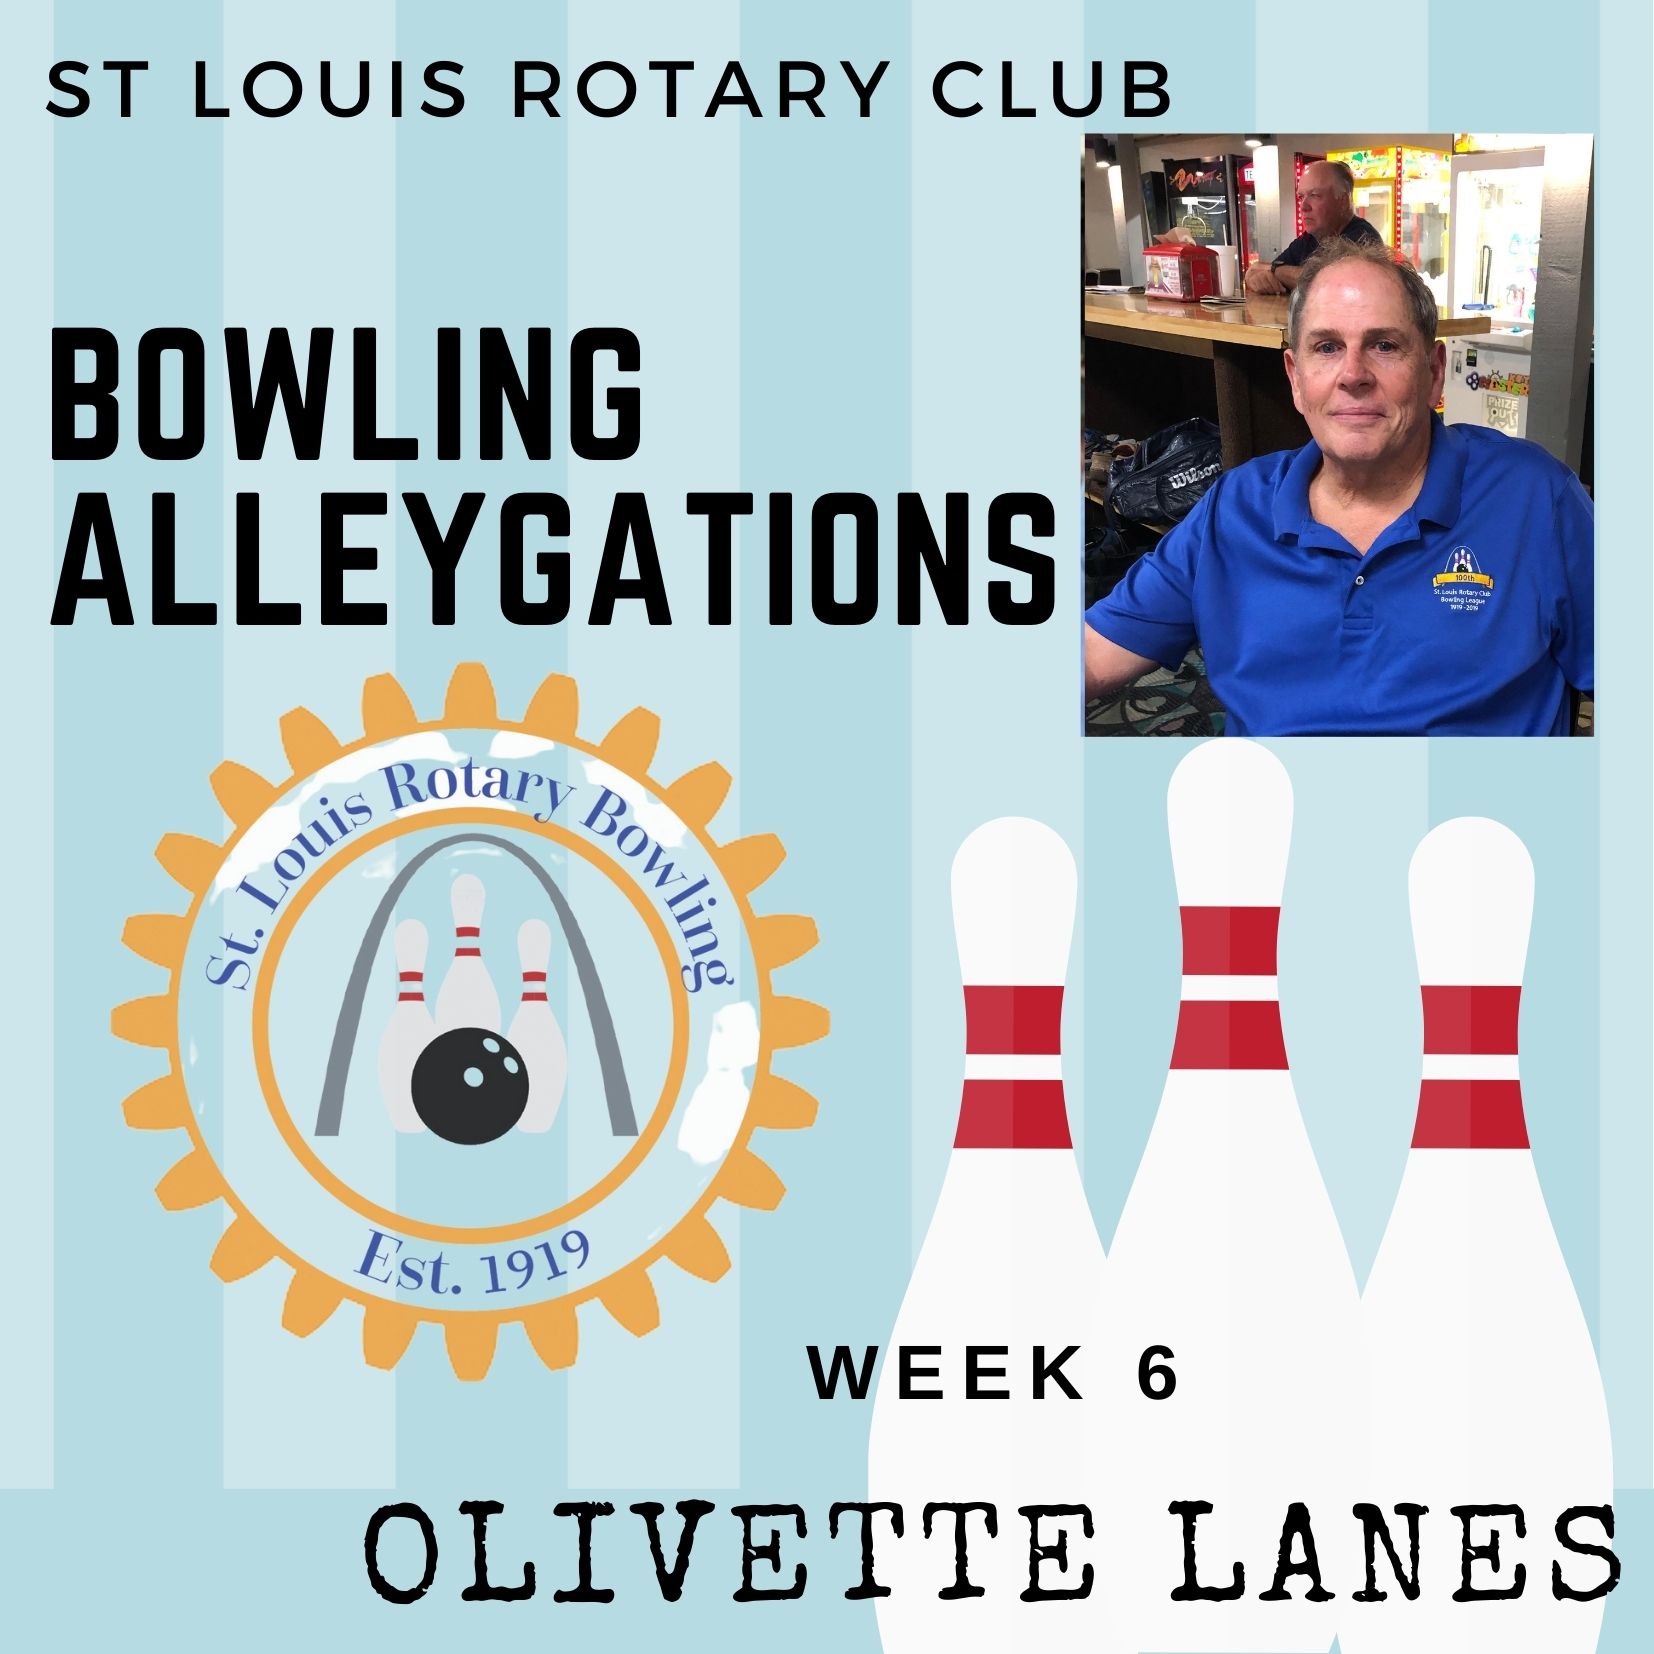 Wk 6 at Olivette Lanes - Curt Linton Alleygations